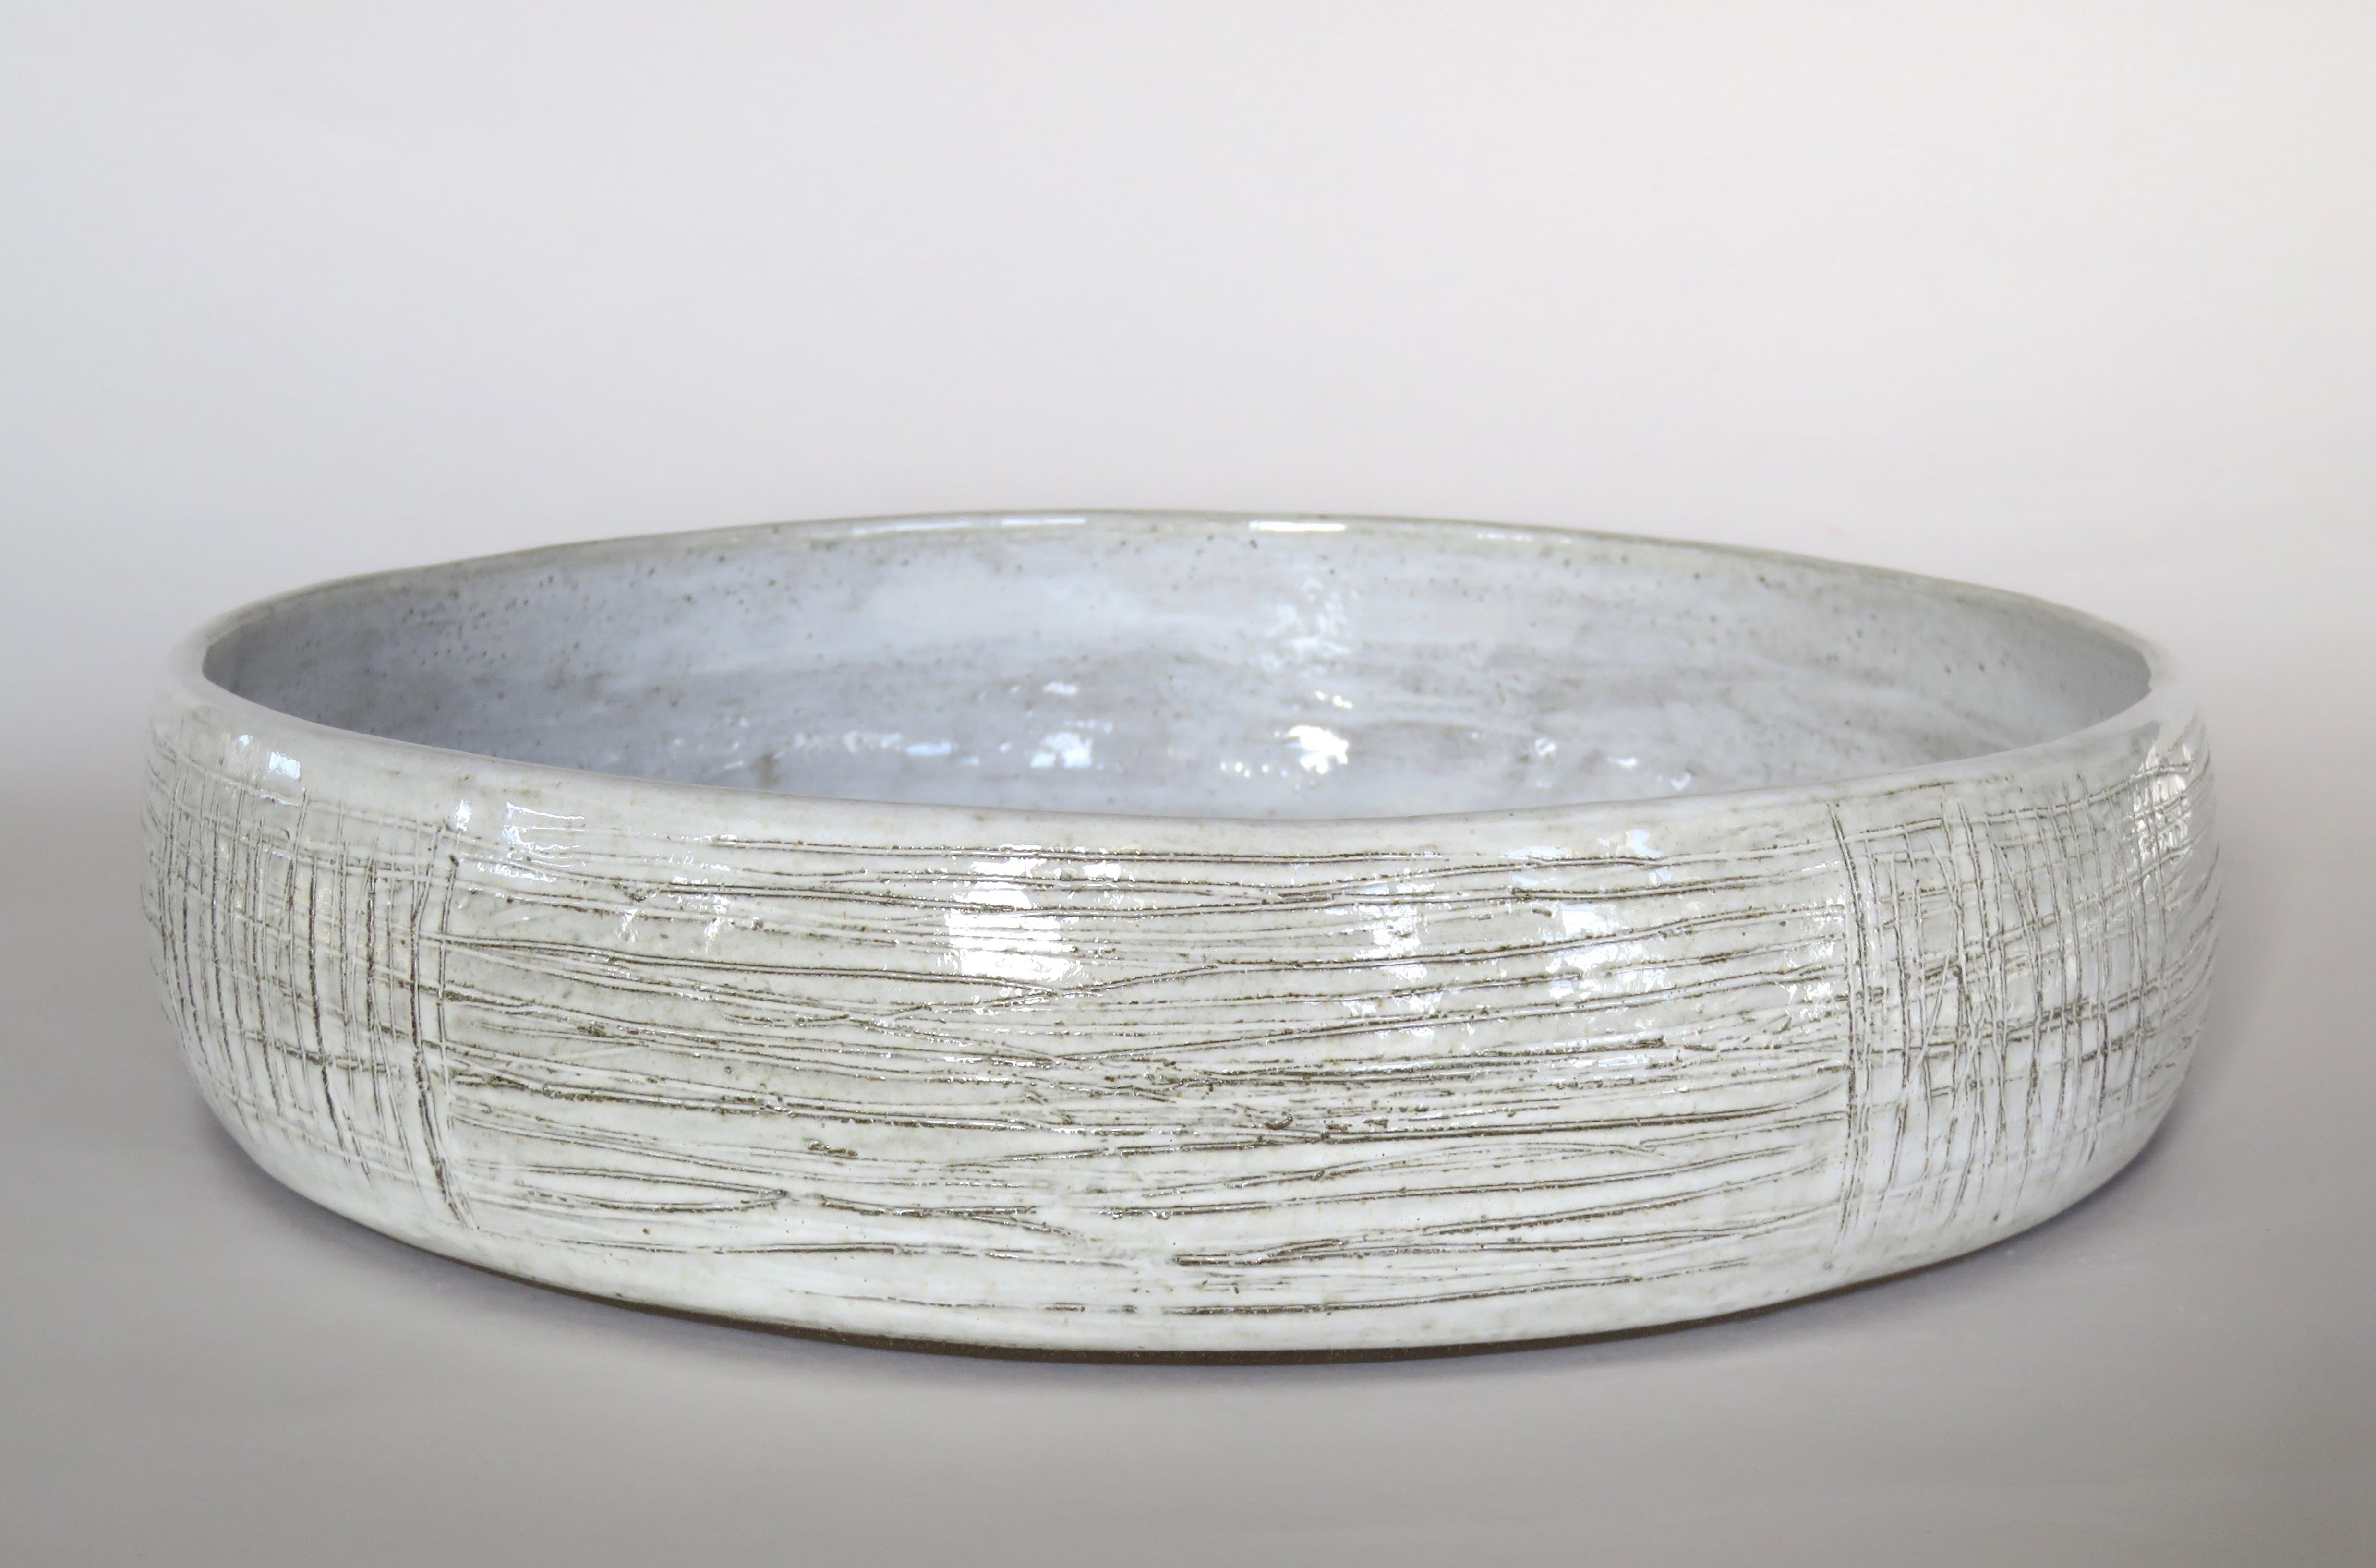 Large Low Serving Bowl, Carved Exterior with White Glaze, Hand Built Ceramic 3